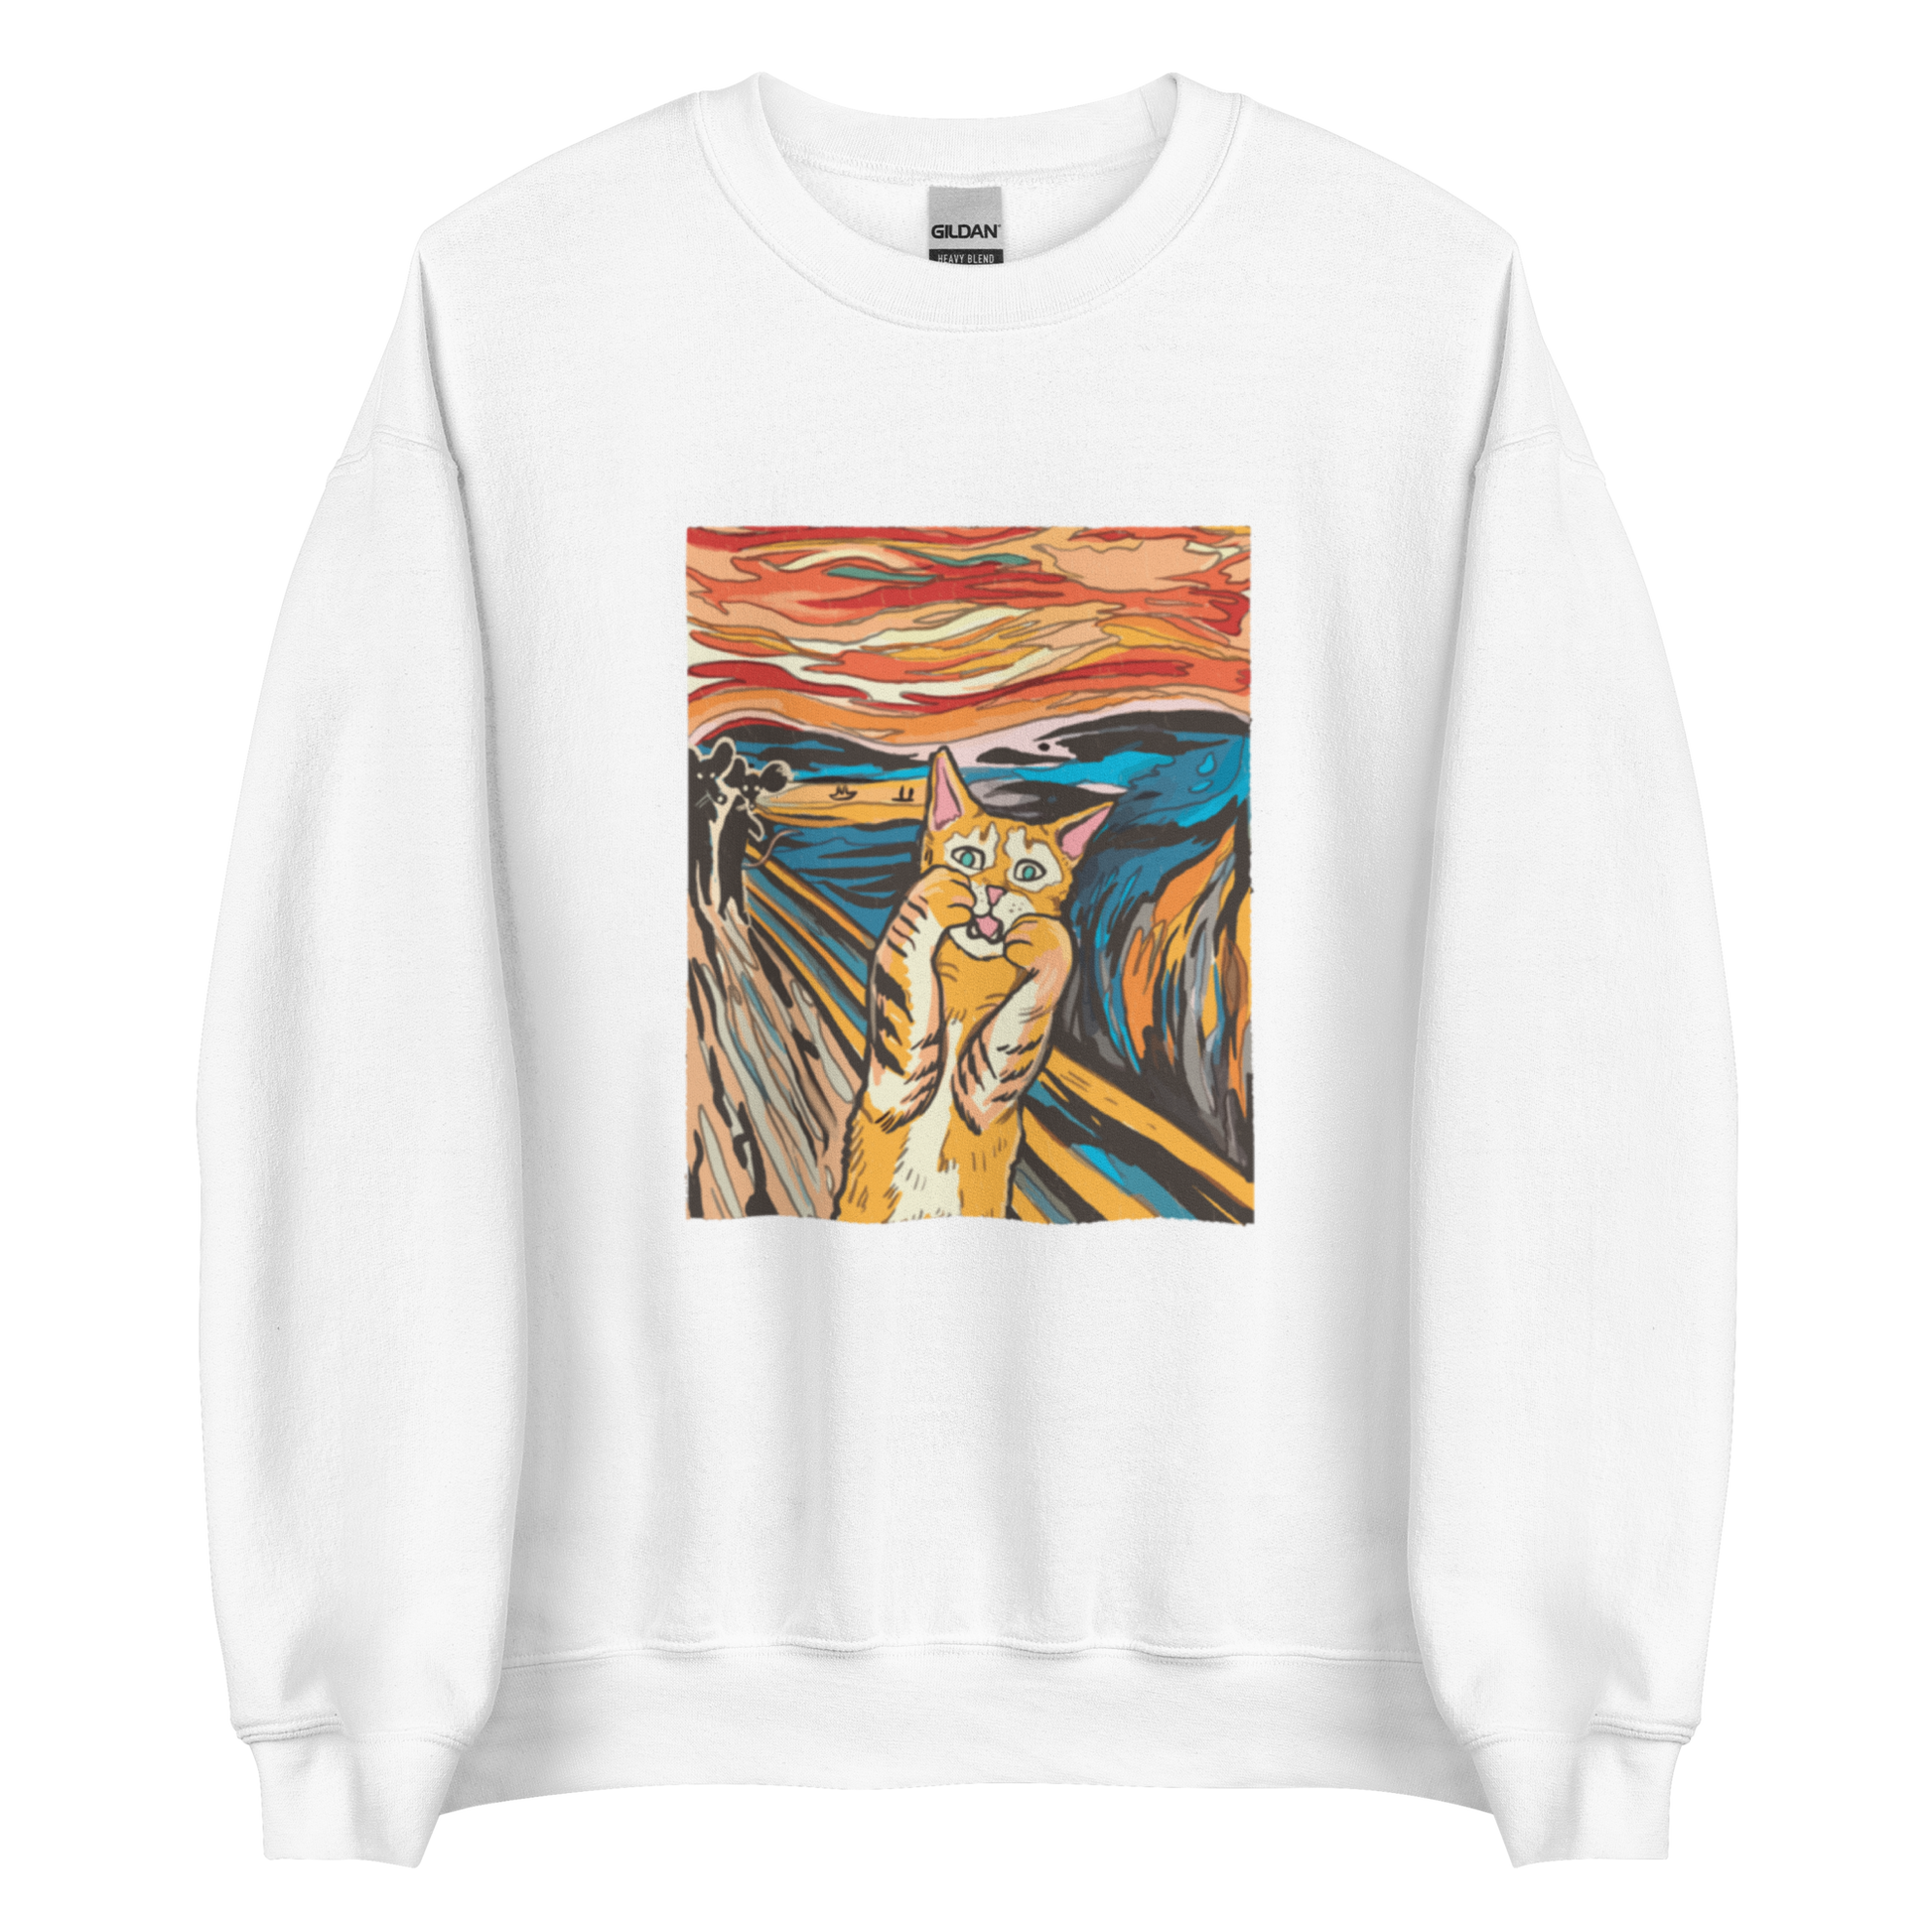 White Screaming Cat Sweatshirt featuring an Edvard Munch's 'The Scream' graphic on the chest - Funny Graphic Cat Sweatshirts - Boozy Fox